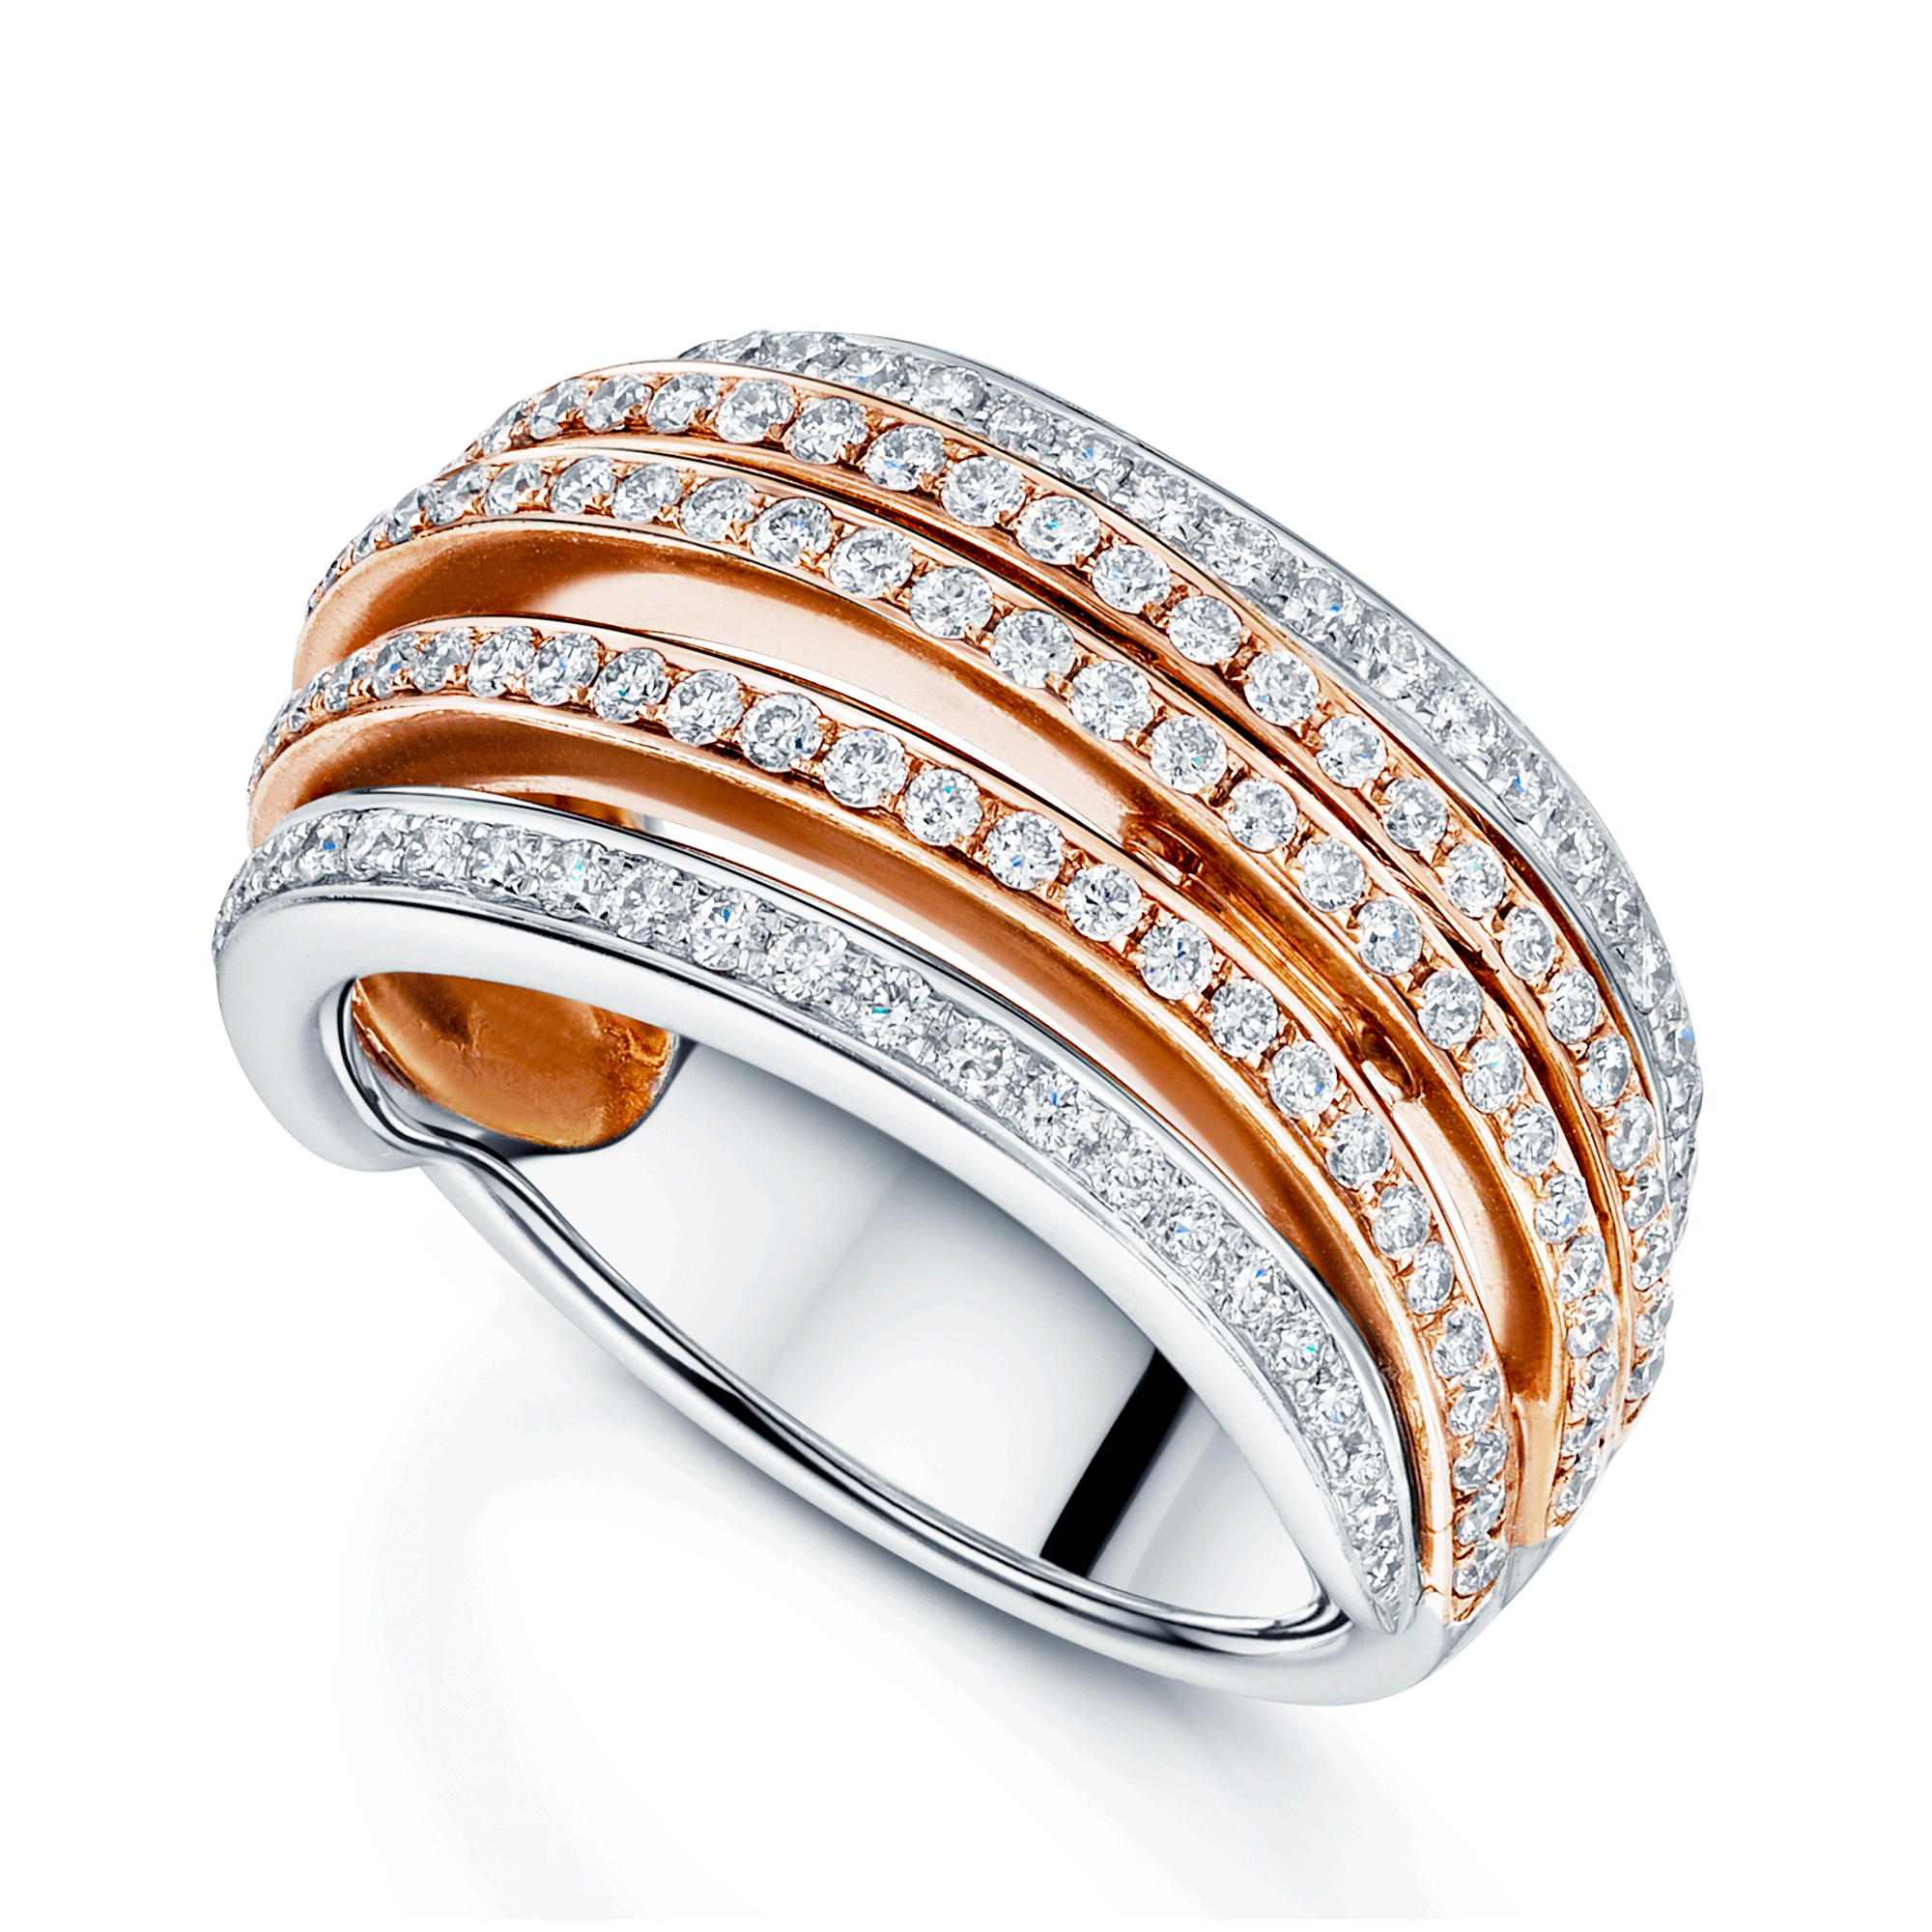 18ct White And Rose Gold Diamond Five Strand Dress Ring